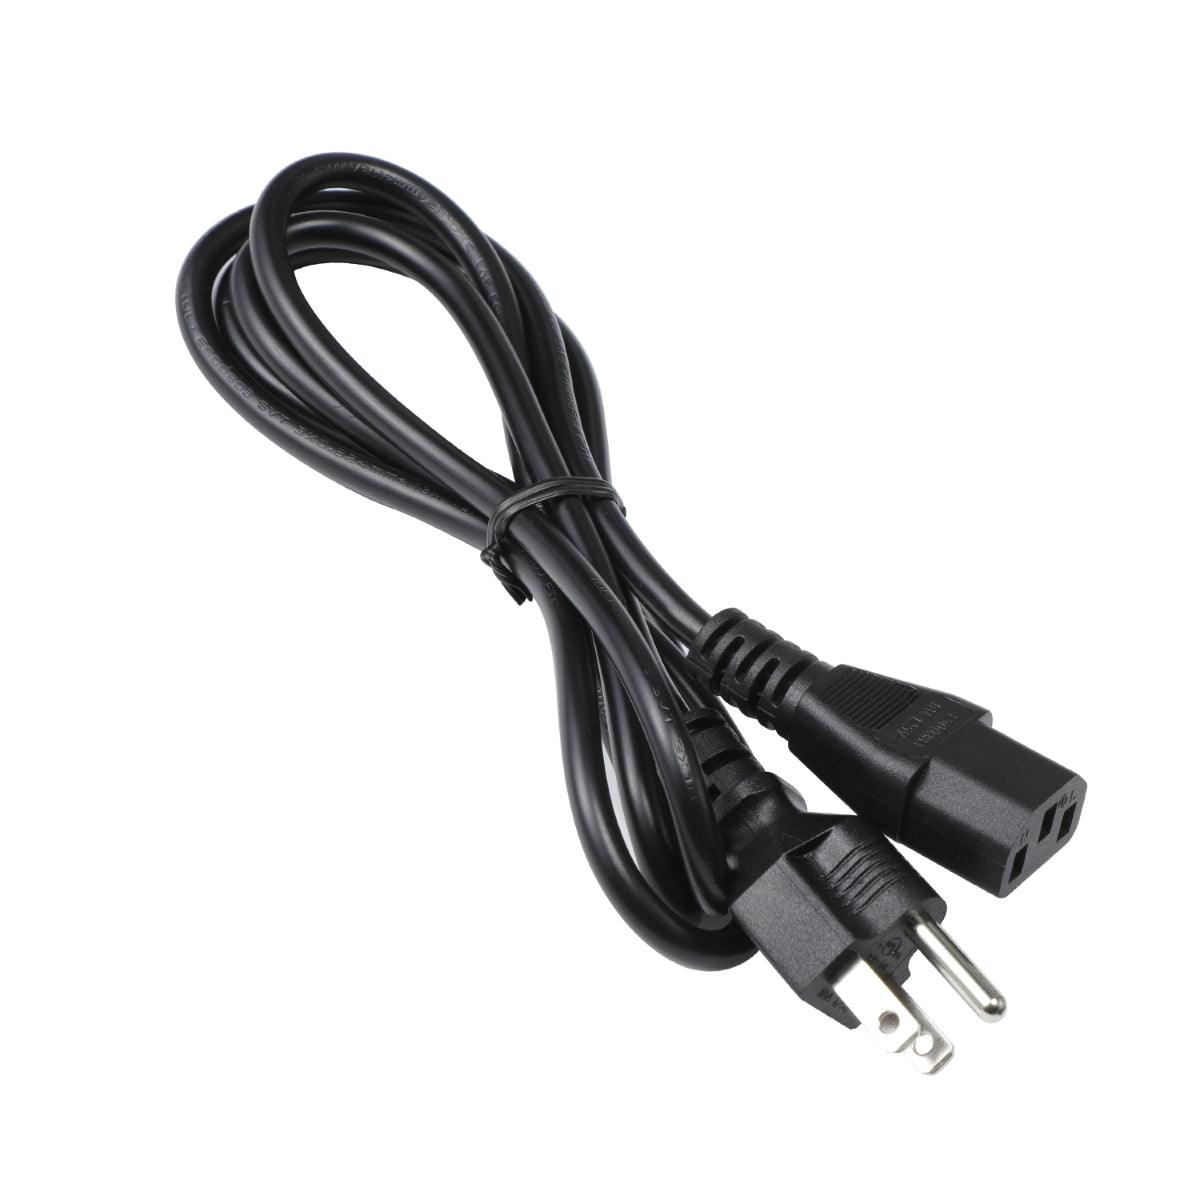 Power Cord for Dell P3222QE Monitor